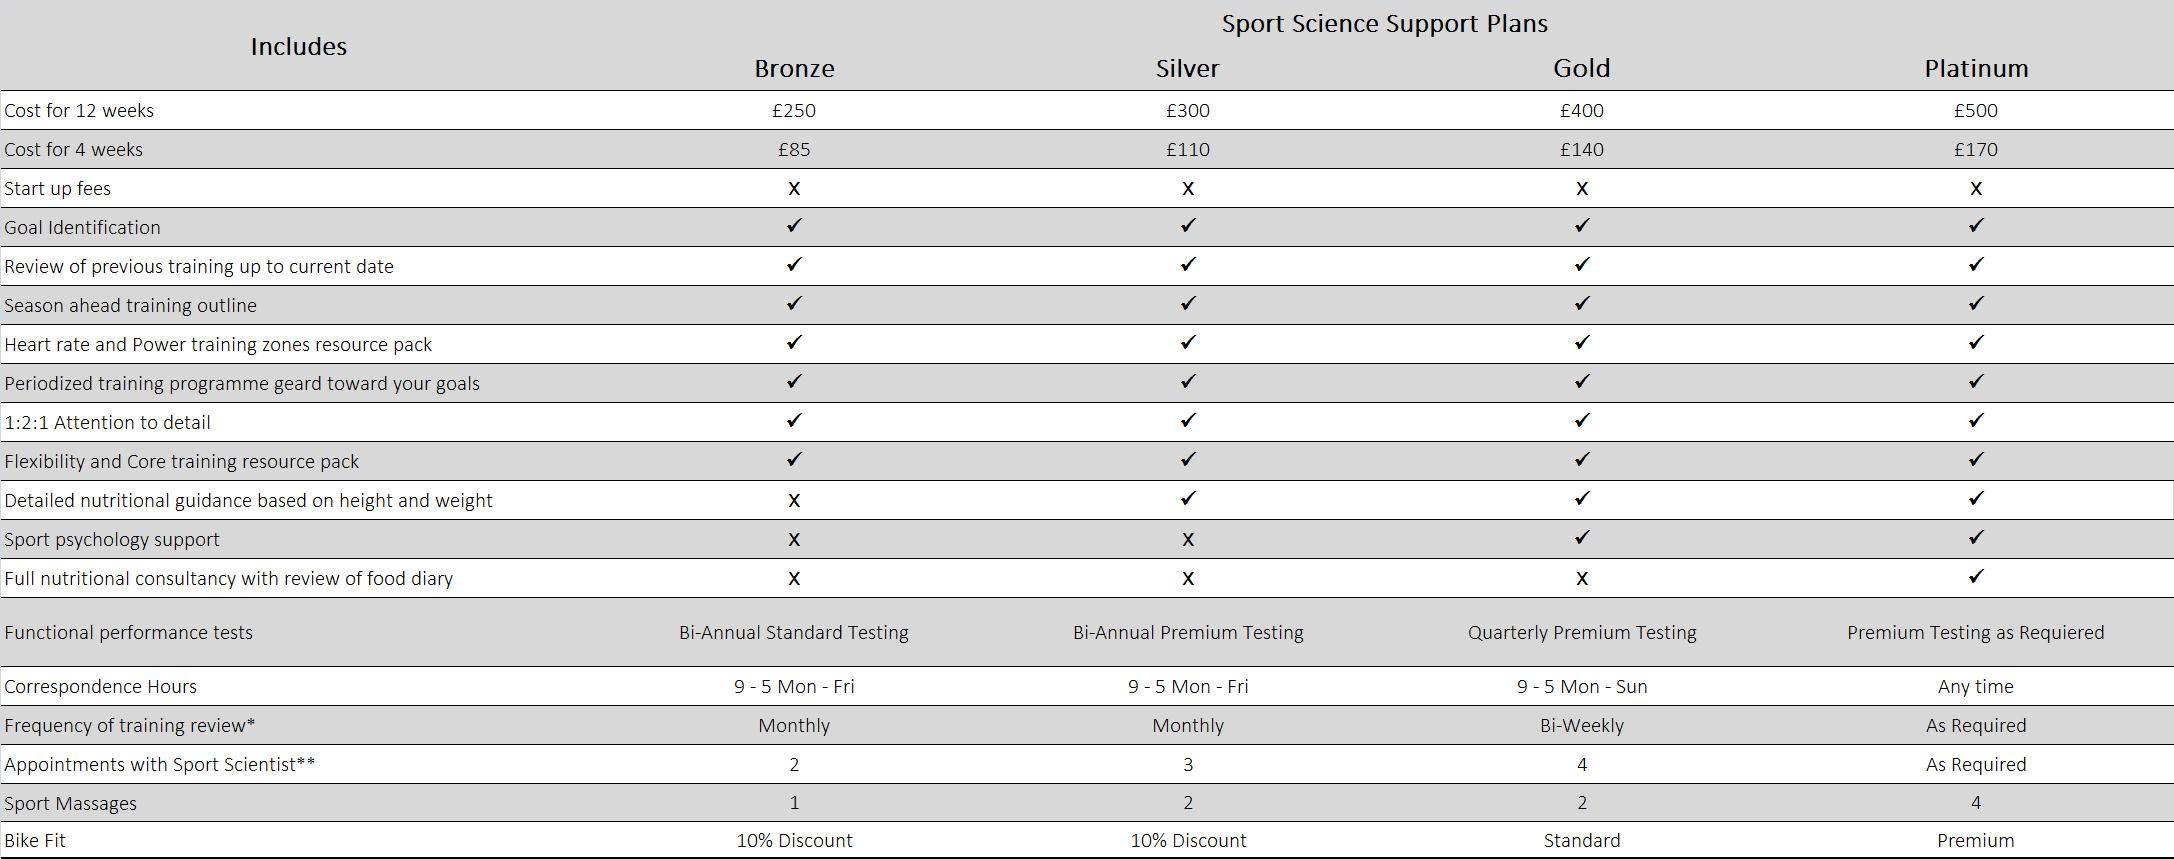 Sport Science Support Plans